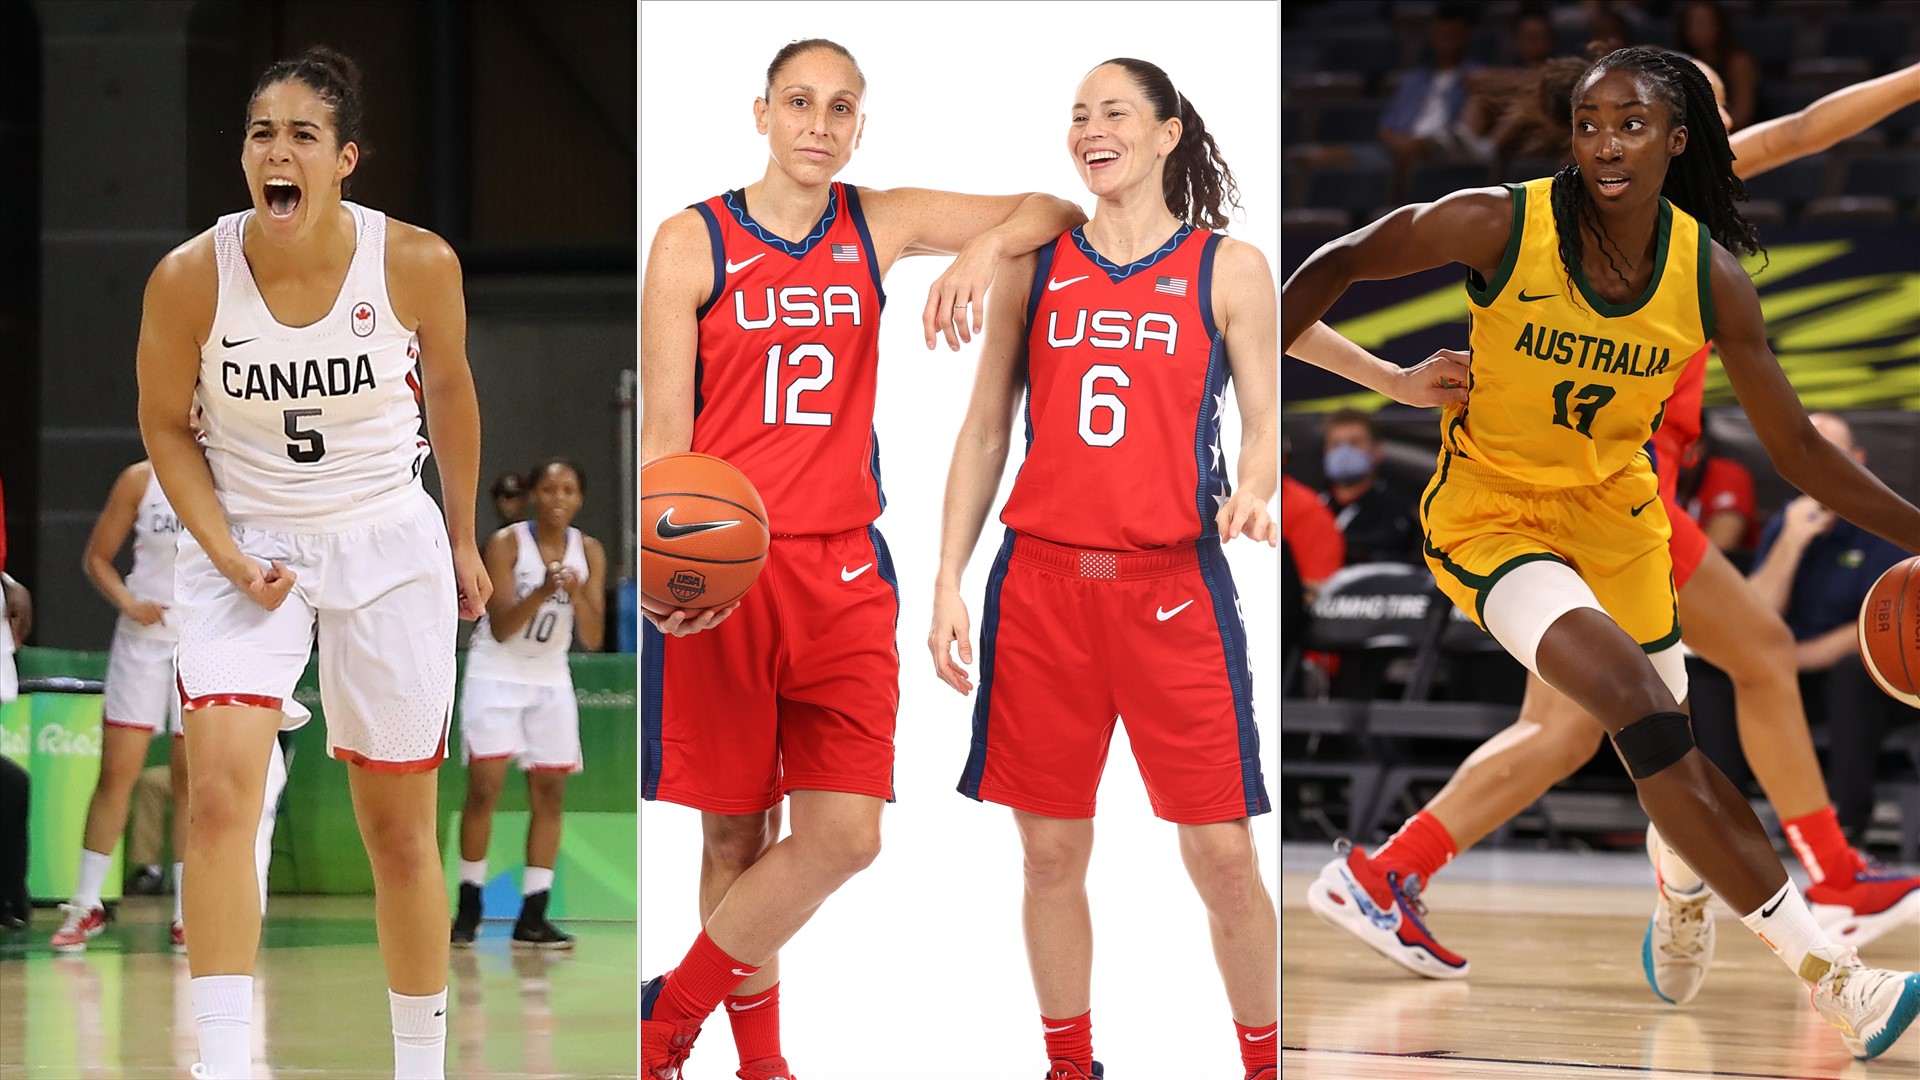 Women's Basketball Guide to the Tokyo 2020 Olympic Games: Groups, Rosters, WNBA Figures, Matches and More | NBA.com Mexico | The Official Site of the NBA